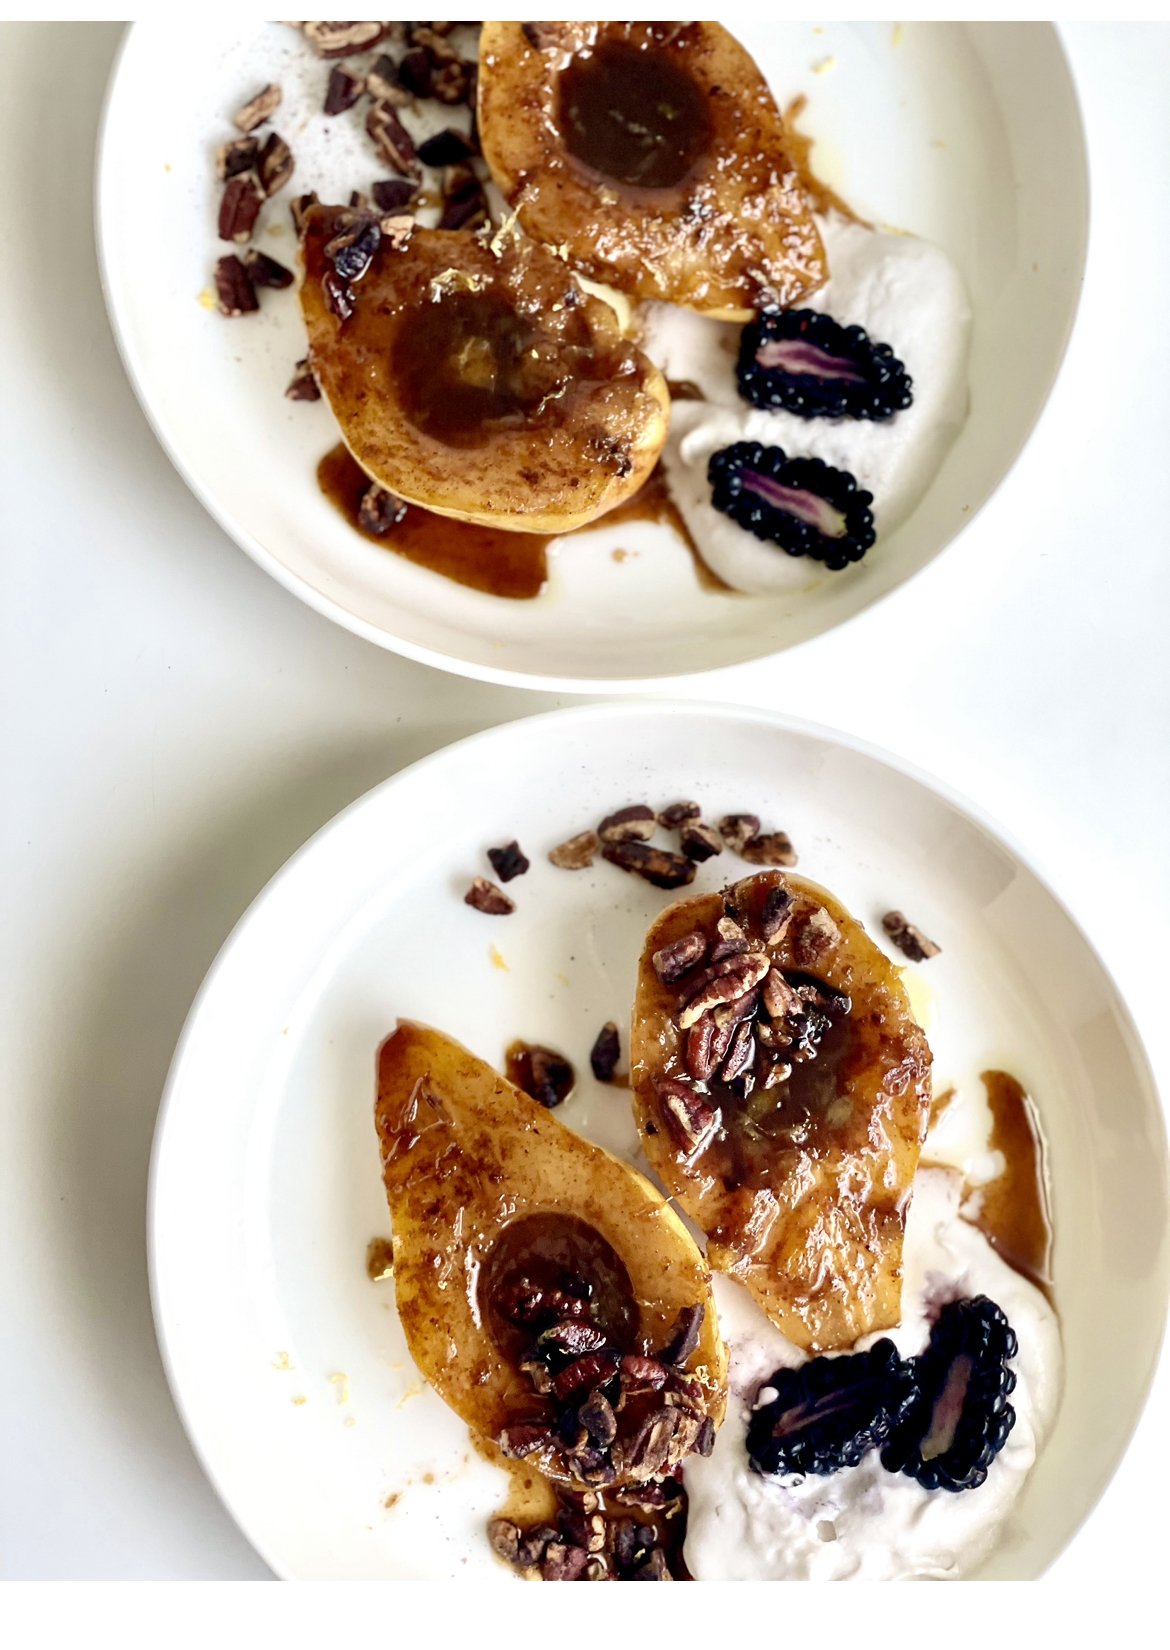 Spiced Baked Pears, Whipped Coconut Cream